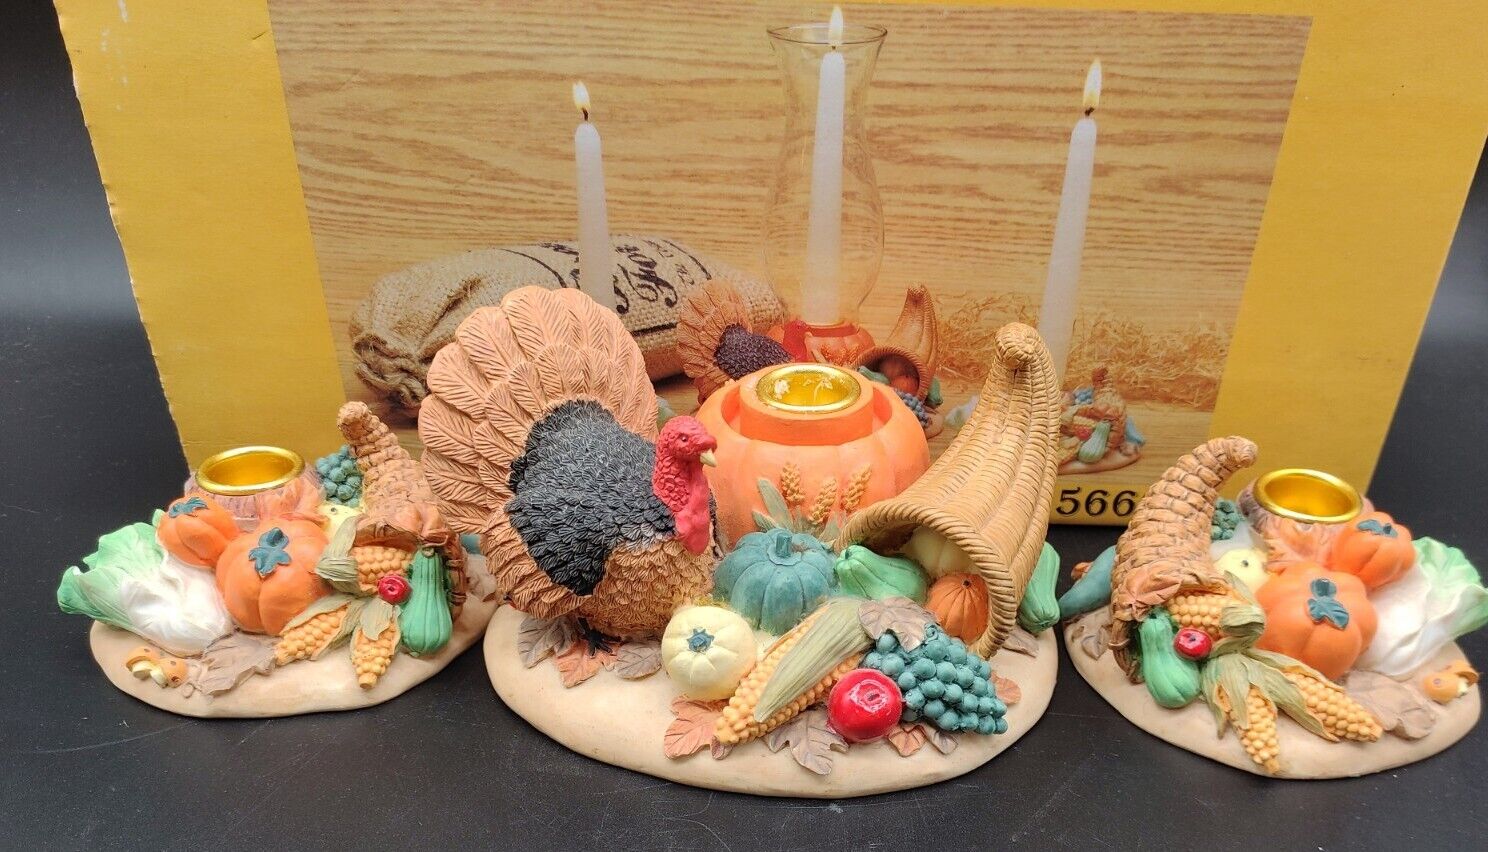 Vtg 3 Pc. Turkey Candle Centerpiece Harvest Resin ABC #56603 Thanksgiving Fall